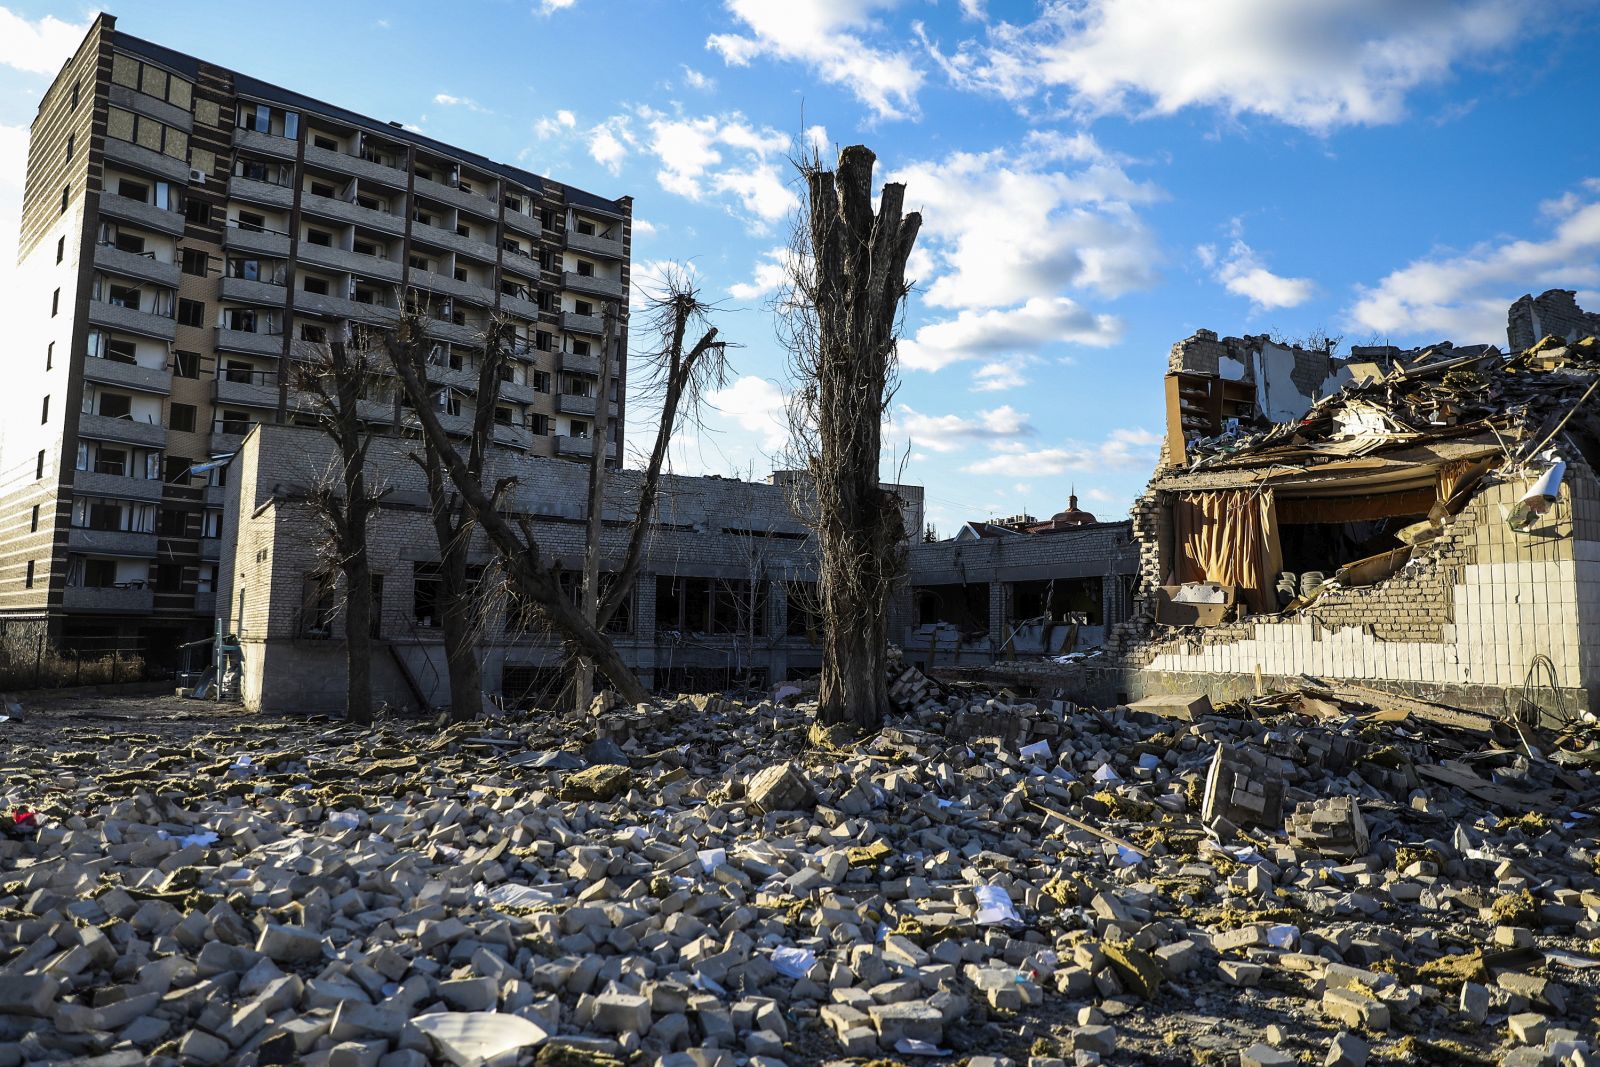 epa09818273 A building that was destroyed by a bomb  near the school number 25 in Zhytomyr, Ukraine, 11 March 2022. According to the United Nations refugee agency UNHCR, over 2.5 million people have fled Ukraine since the Russian invasion began on 24 February. Many, however, have decided to stay and fight.  EPA/MIGUEL A. LOPES